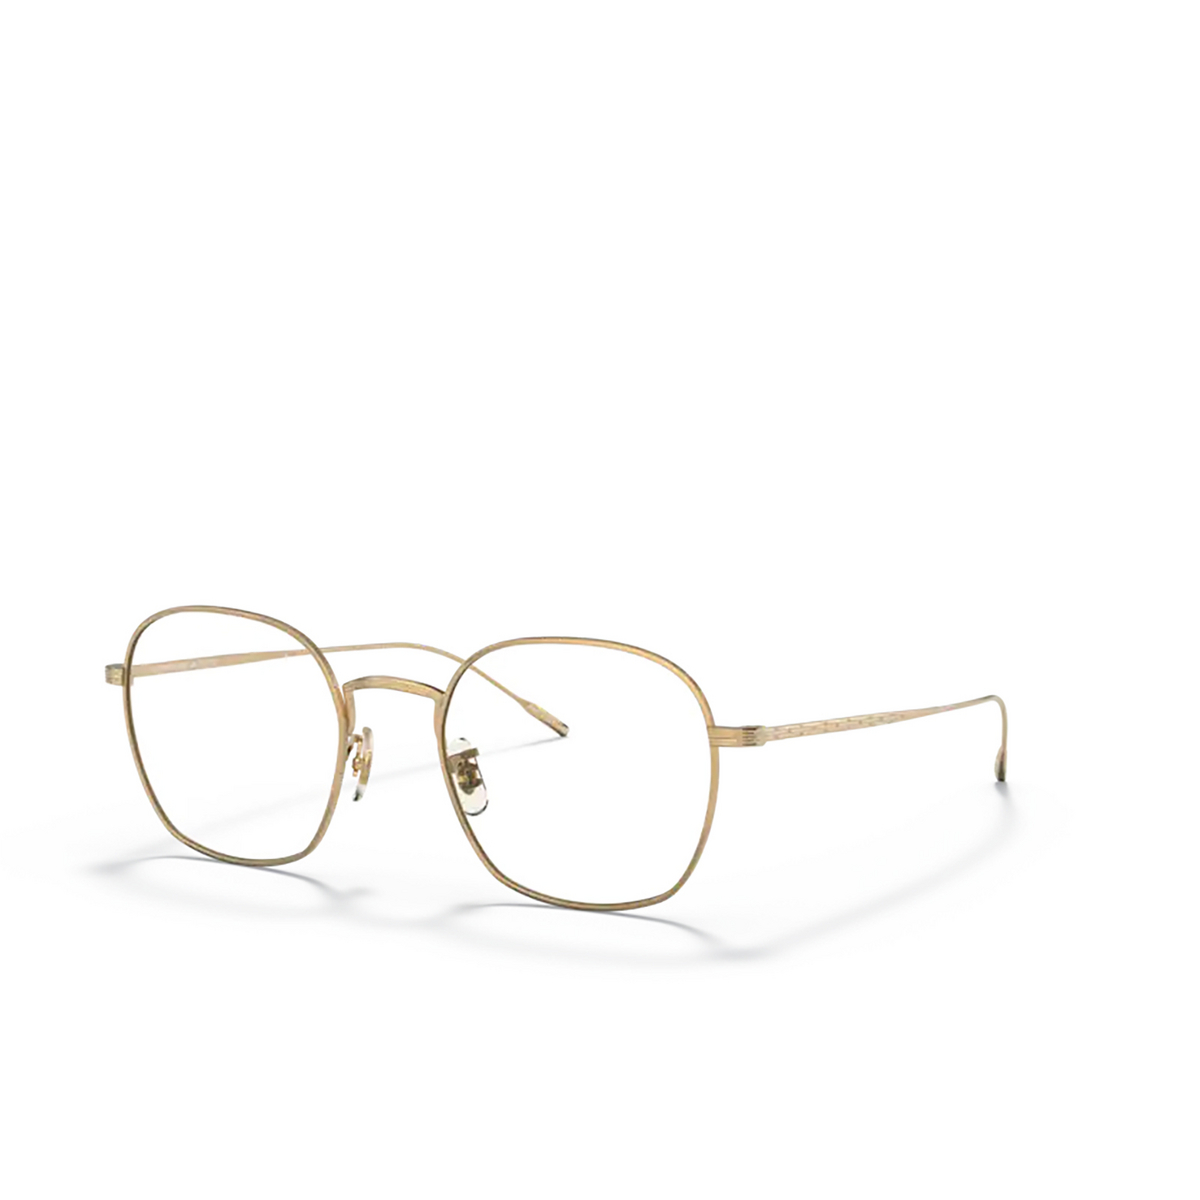 Oliver Peoples ADES Sunglasses 5292SB Gold - three-quarters view